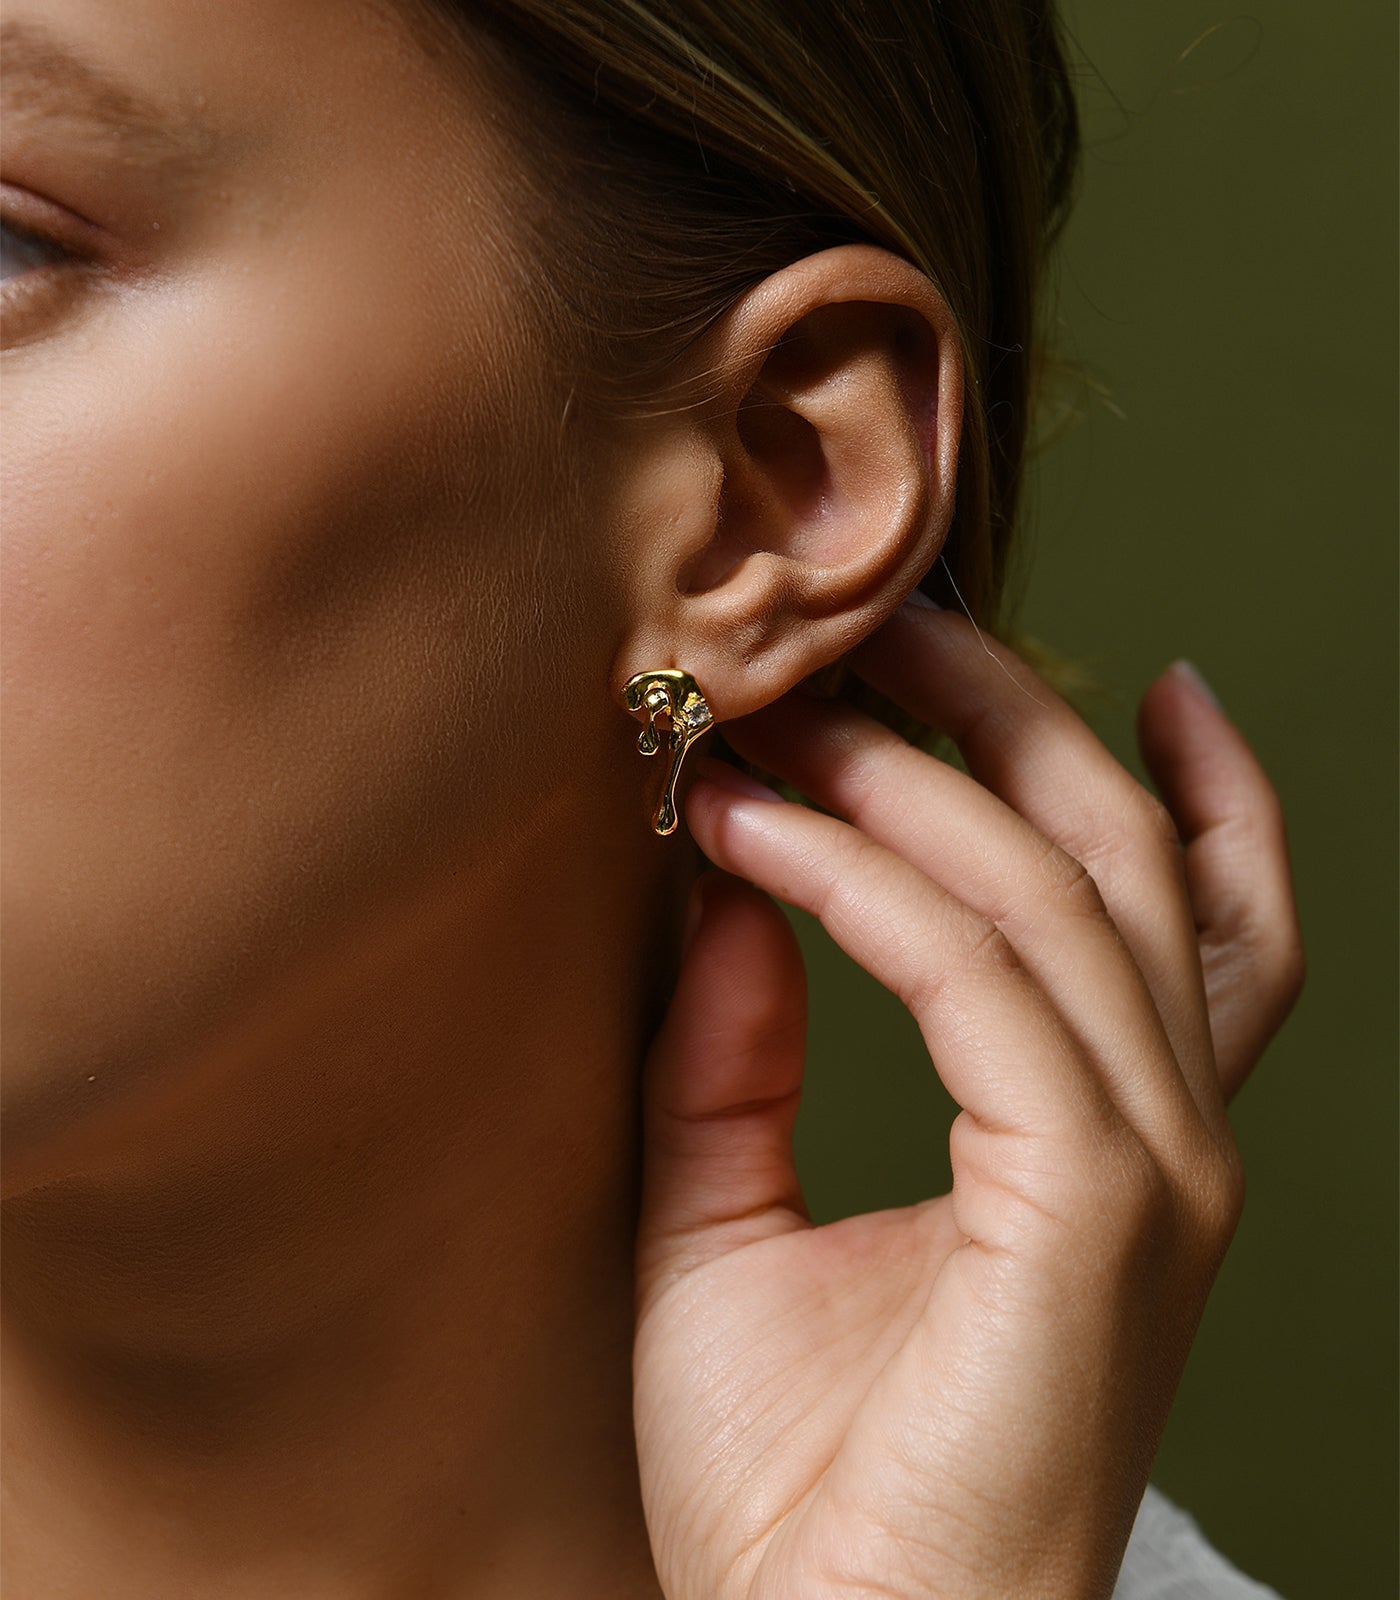 A model wears a pair of gold vermeil stud earrings, shaped to resemble water droplets.